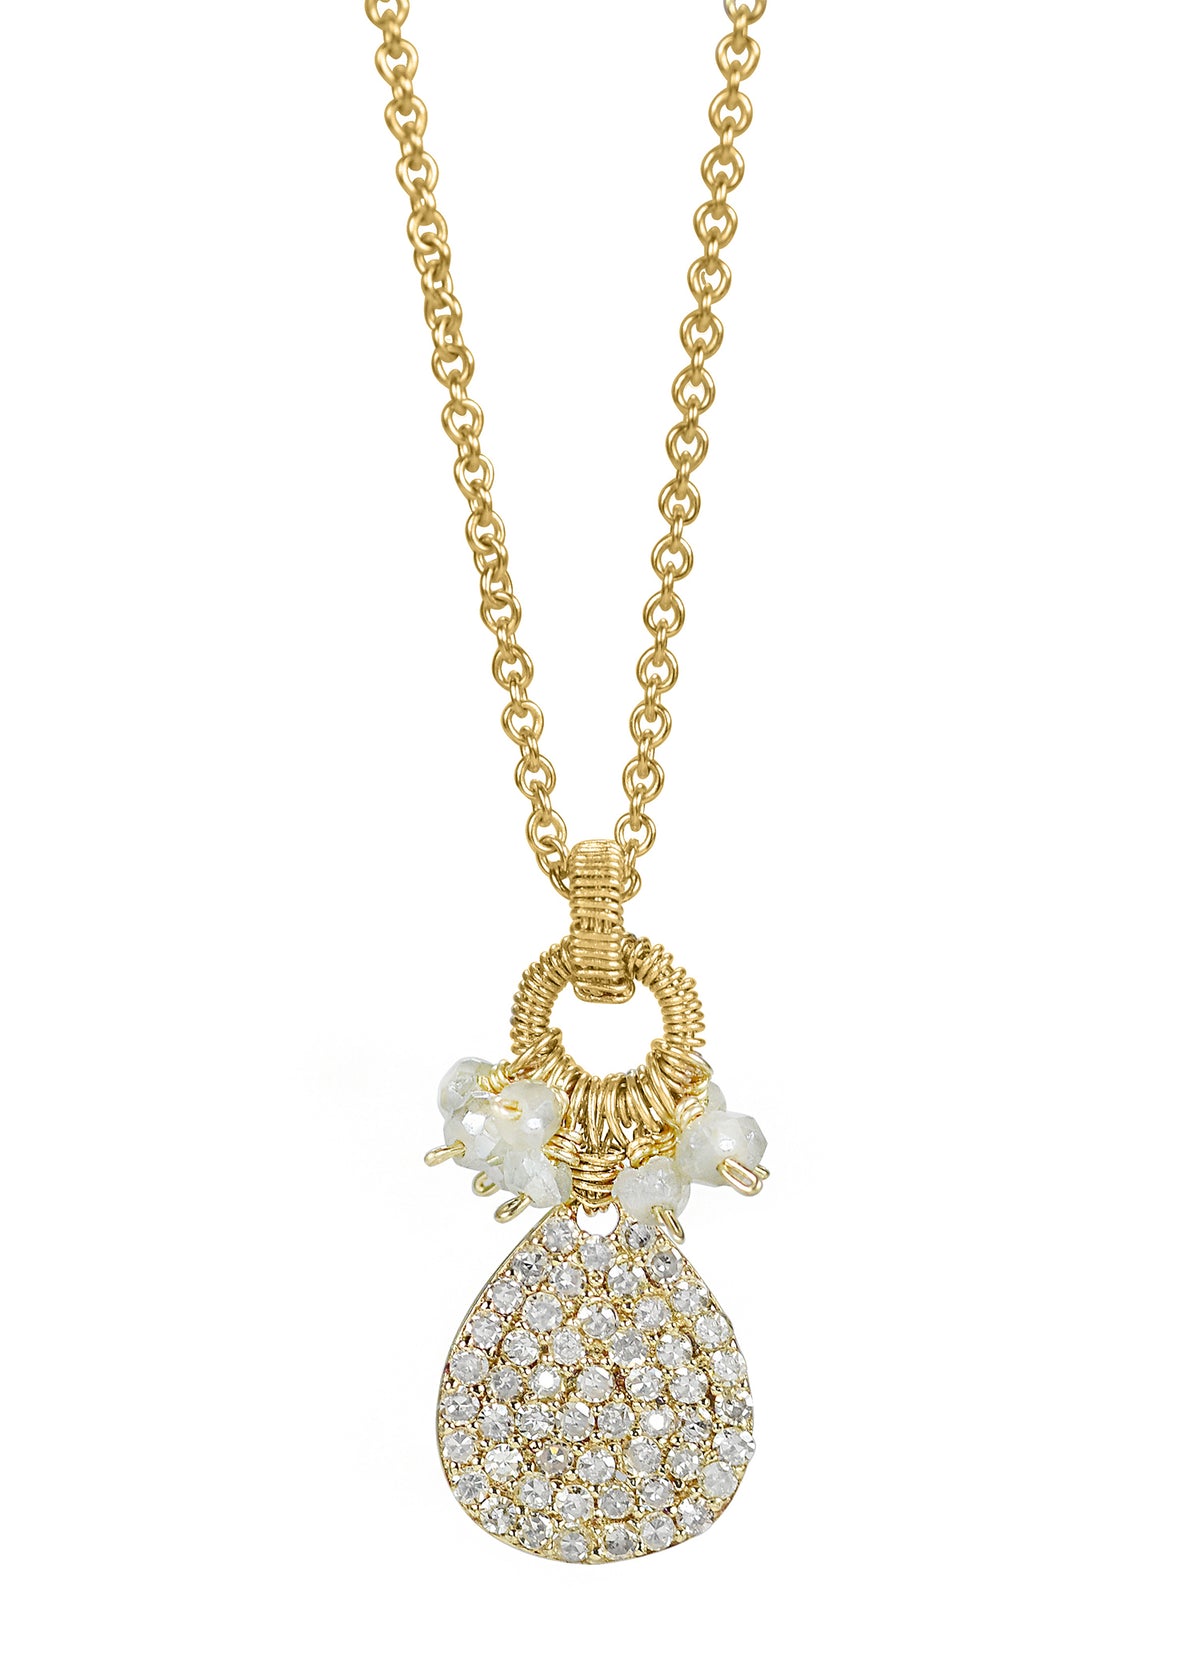 Diamond Silverite 14k gold Necklace measures 16&quot; in length Pendant measures 3/4&quot; in length and 3/8&quot; in width at the widest point Handmade in our Los Angeles studio